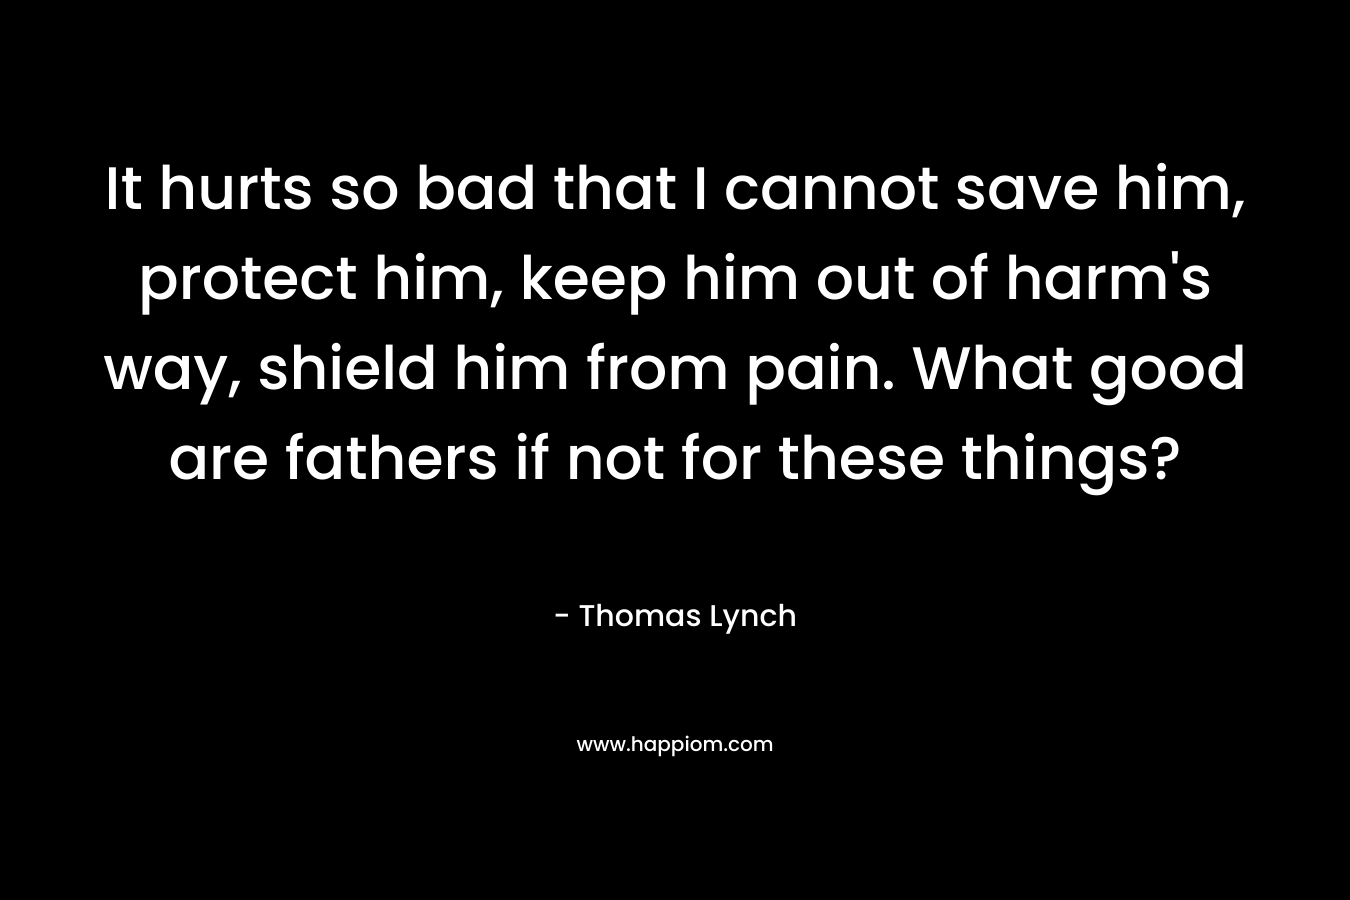 It hurts so bad that I cannot save him, protect him, keep him out of harm’s way, shield him from pain. What good are fathers if not for these things? – Thomas Lynch